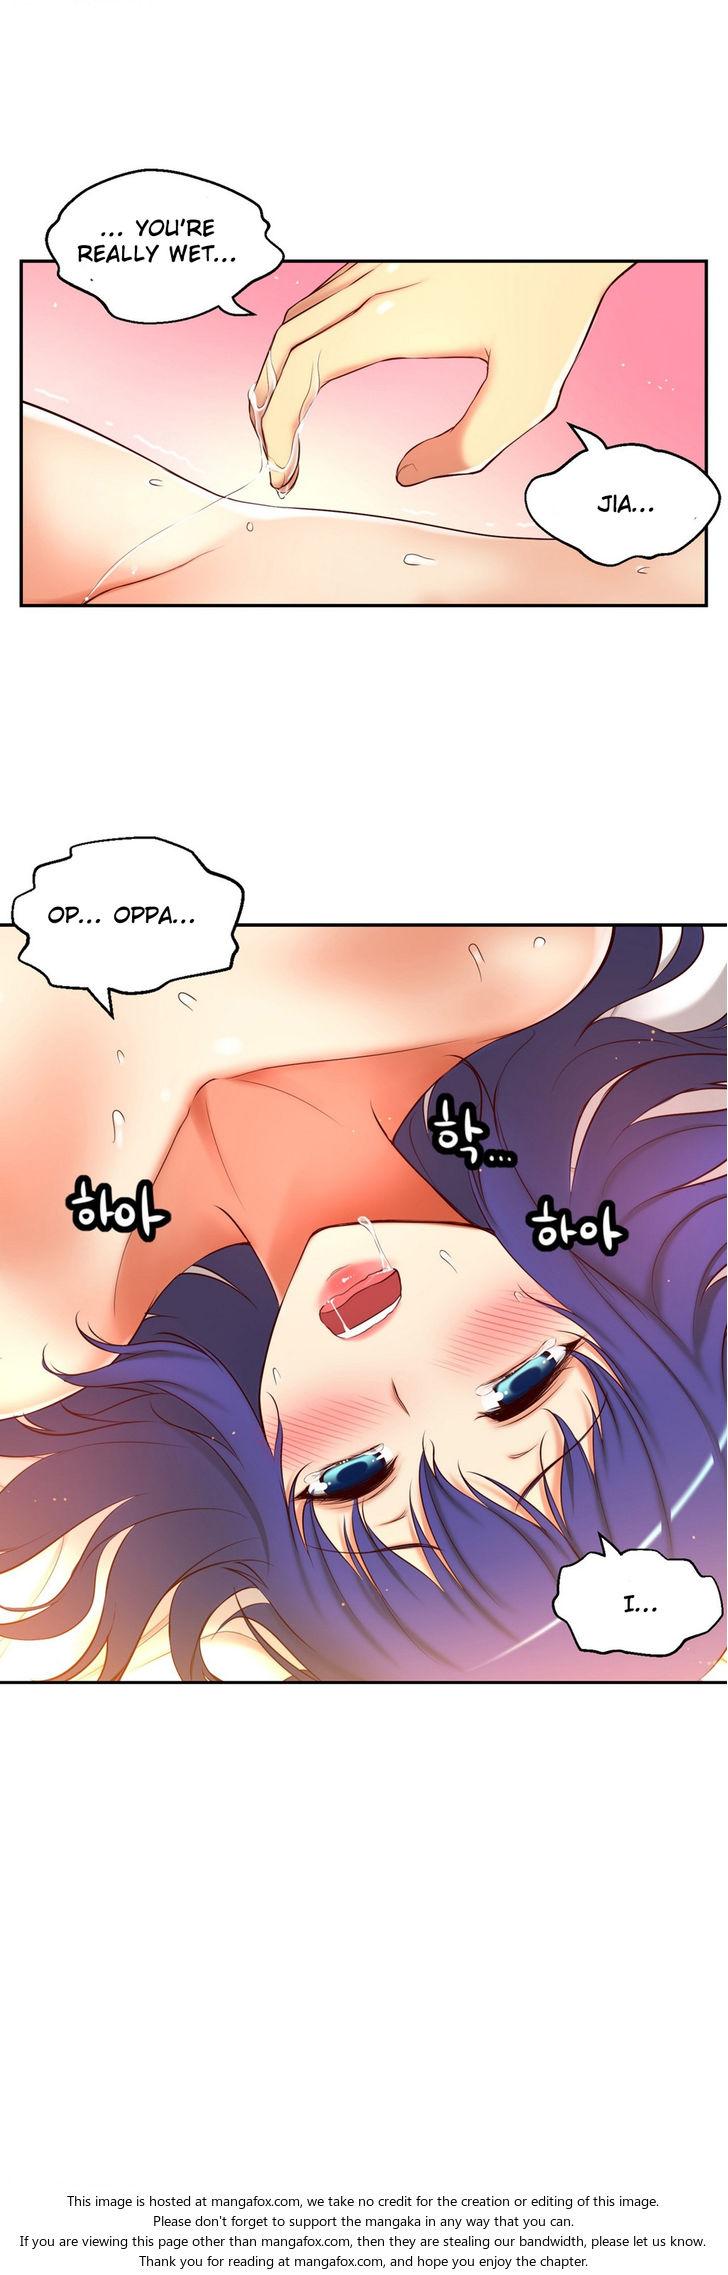 [Donggul Gom] She is Young (English) Part 1/2 1424